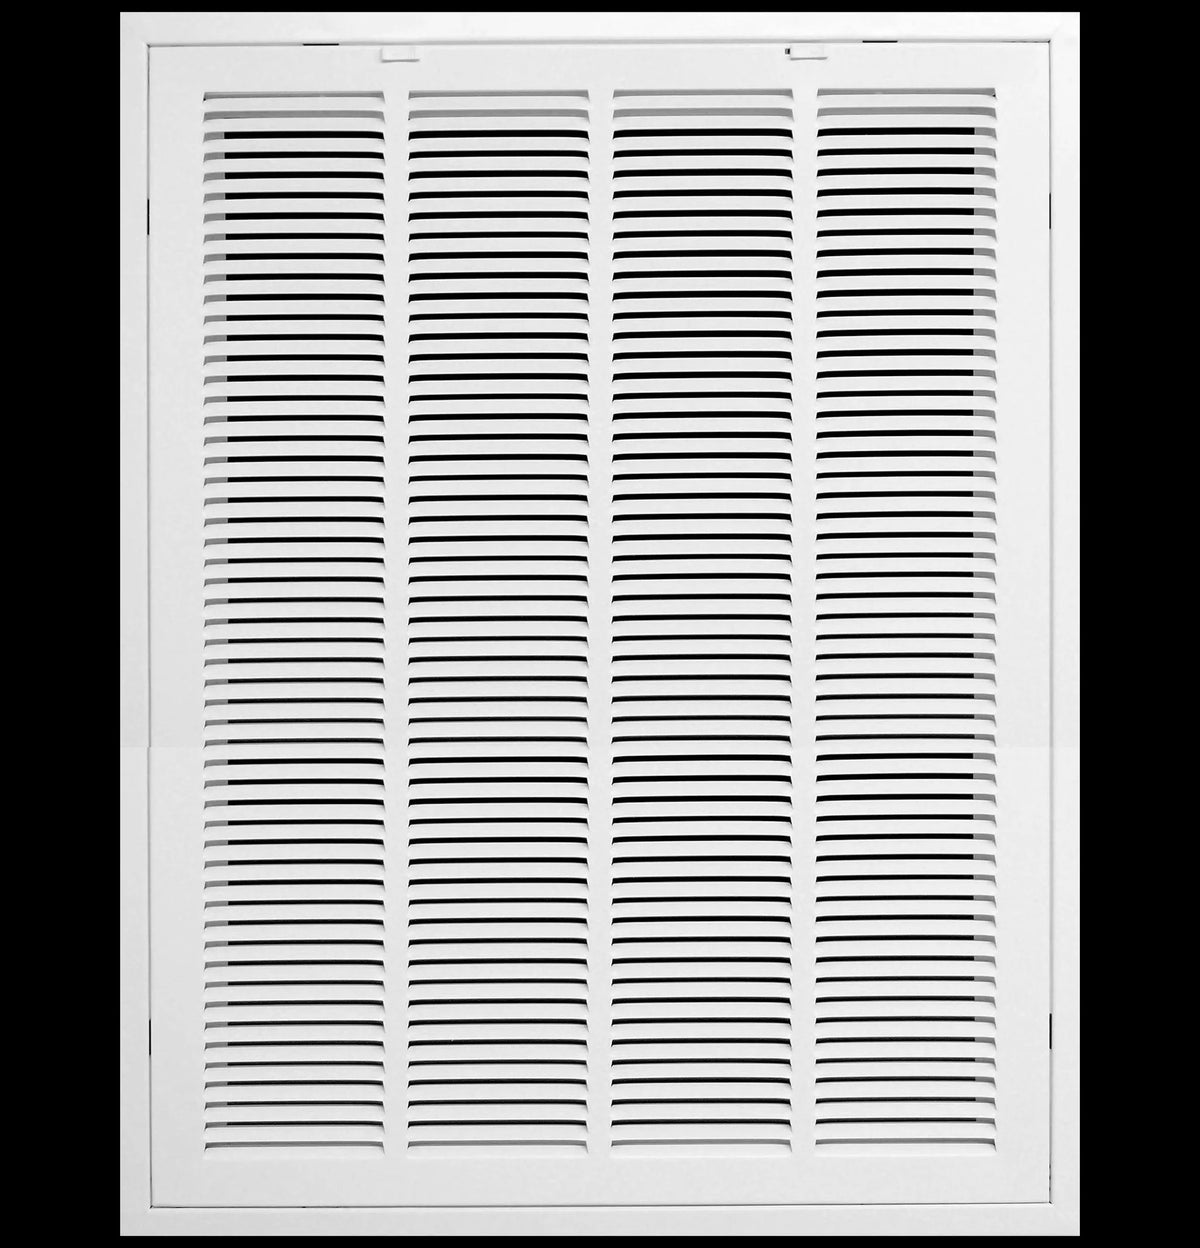 20&quot; X 40&quot; Steel Return Air Filter Grille for 1&quot; Filter - Removable Frame - [Outer Dimensions: 22 5/8&quot; X 42 5/8&quot;]